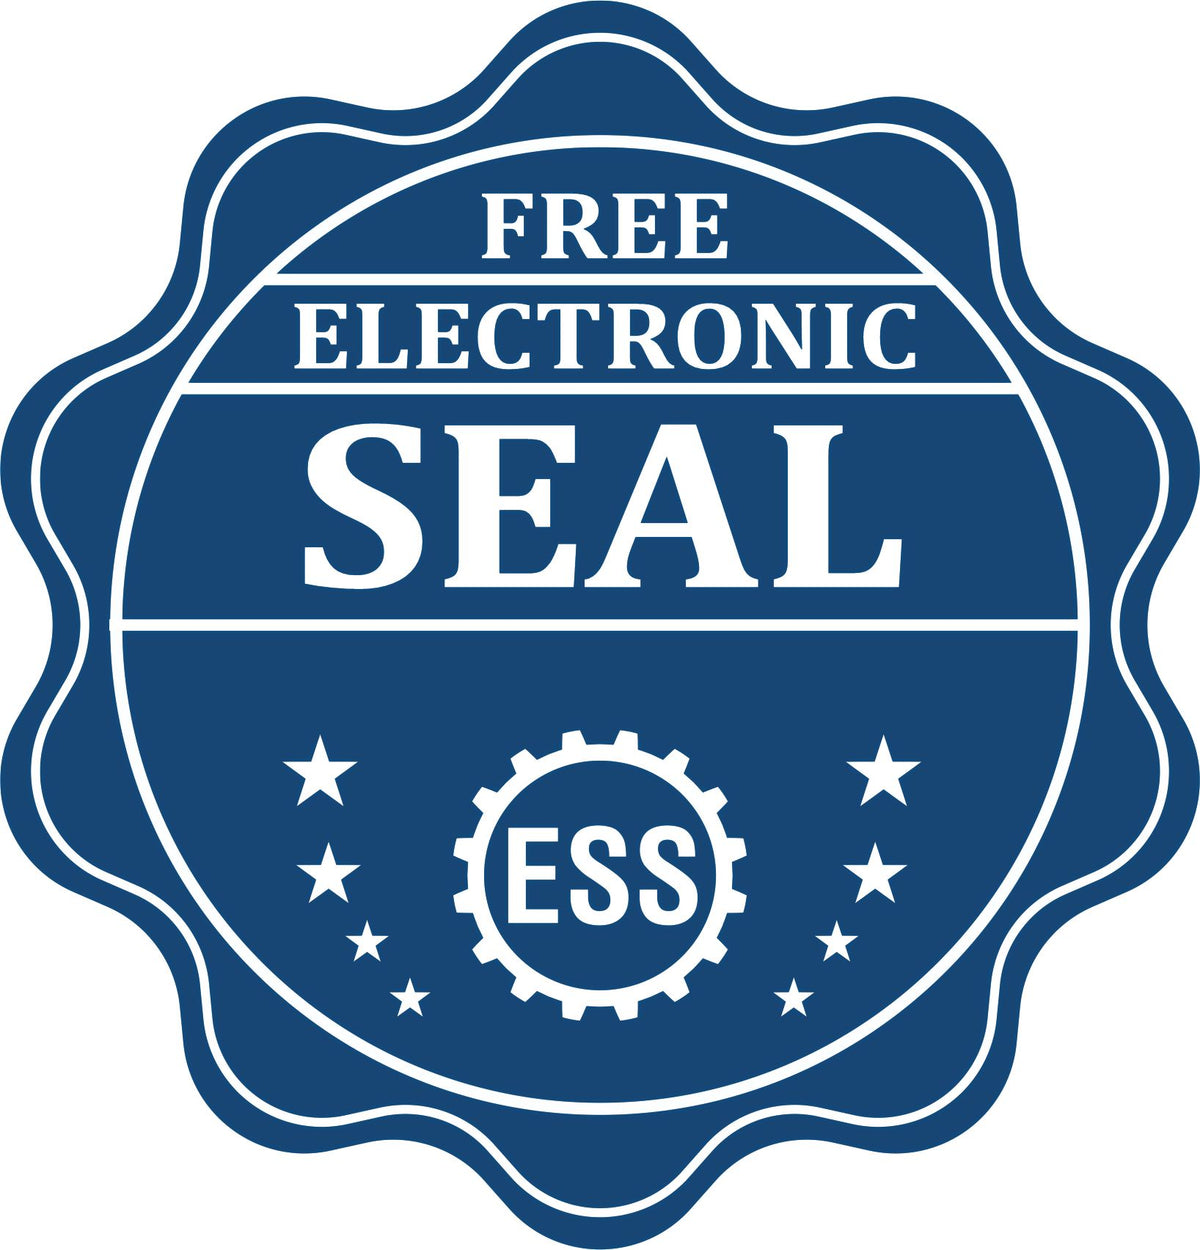 A badge showing a free electronic seal for the South Carolina Engineer Desk Seal with stars and the ESS gear on the emblem.